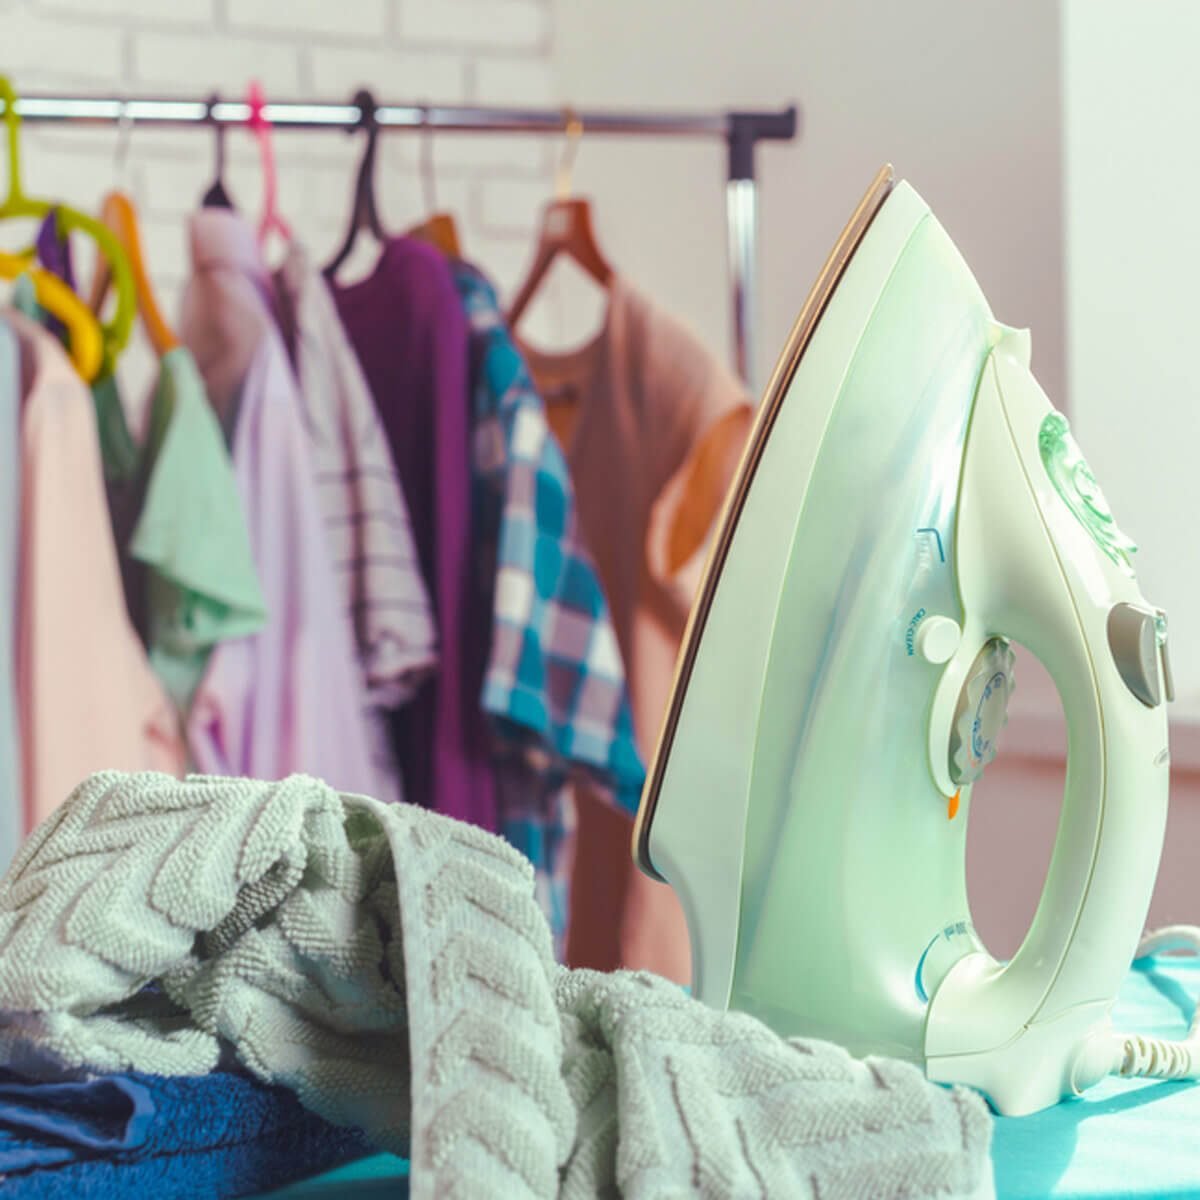 How Do You Wash Clothes? 13 Laundry Tips for Washing Your Clothes